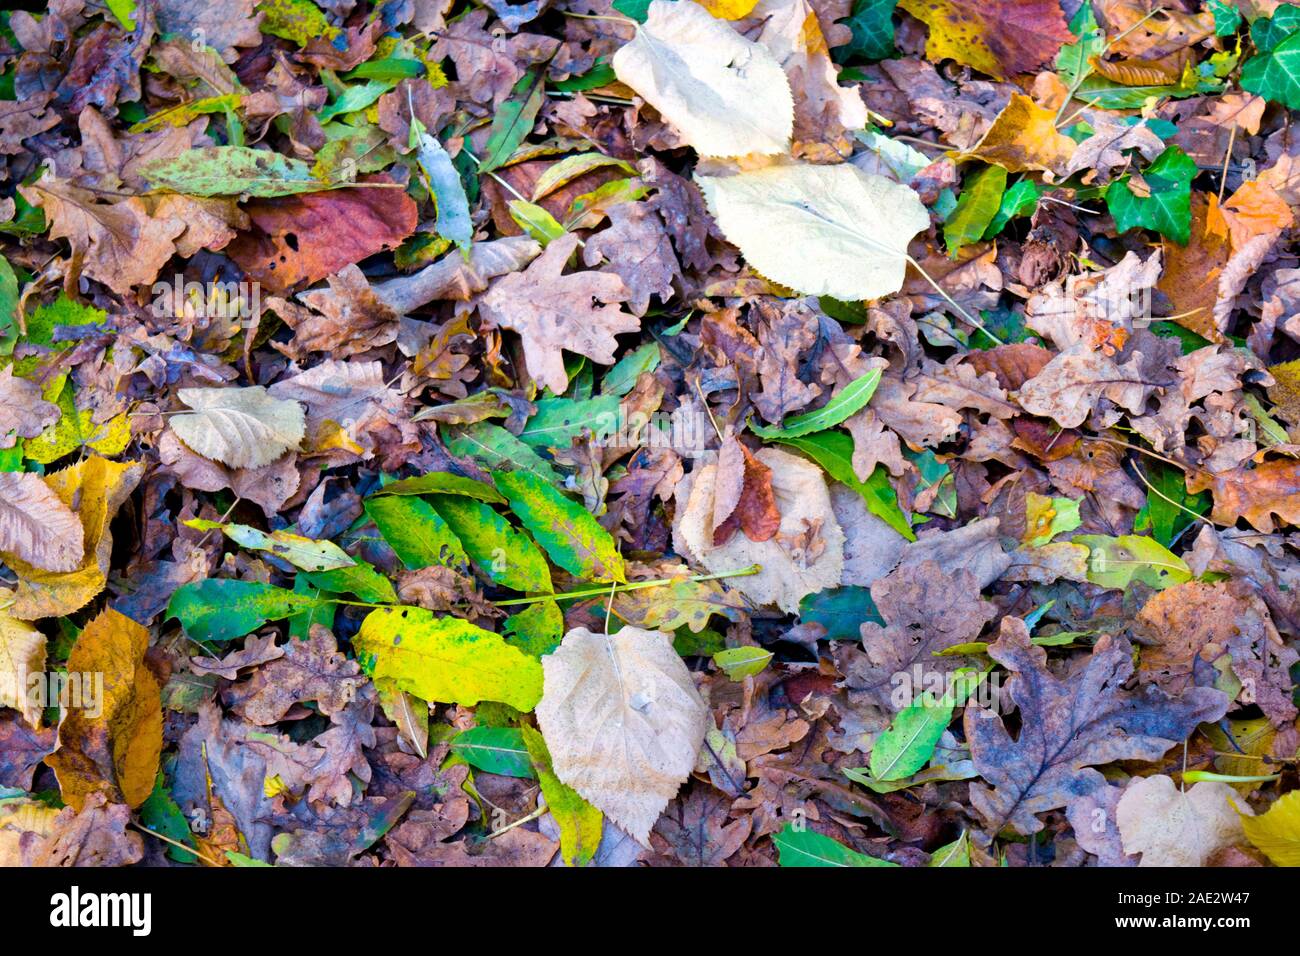 Symbol of nature in the fall season: colorful autumn foliage. Autumn leaf color: various shades of red, yellow, purple, black, blue, orange, magenta. Stock Photo